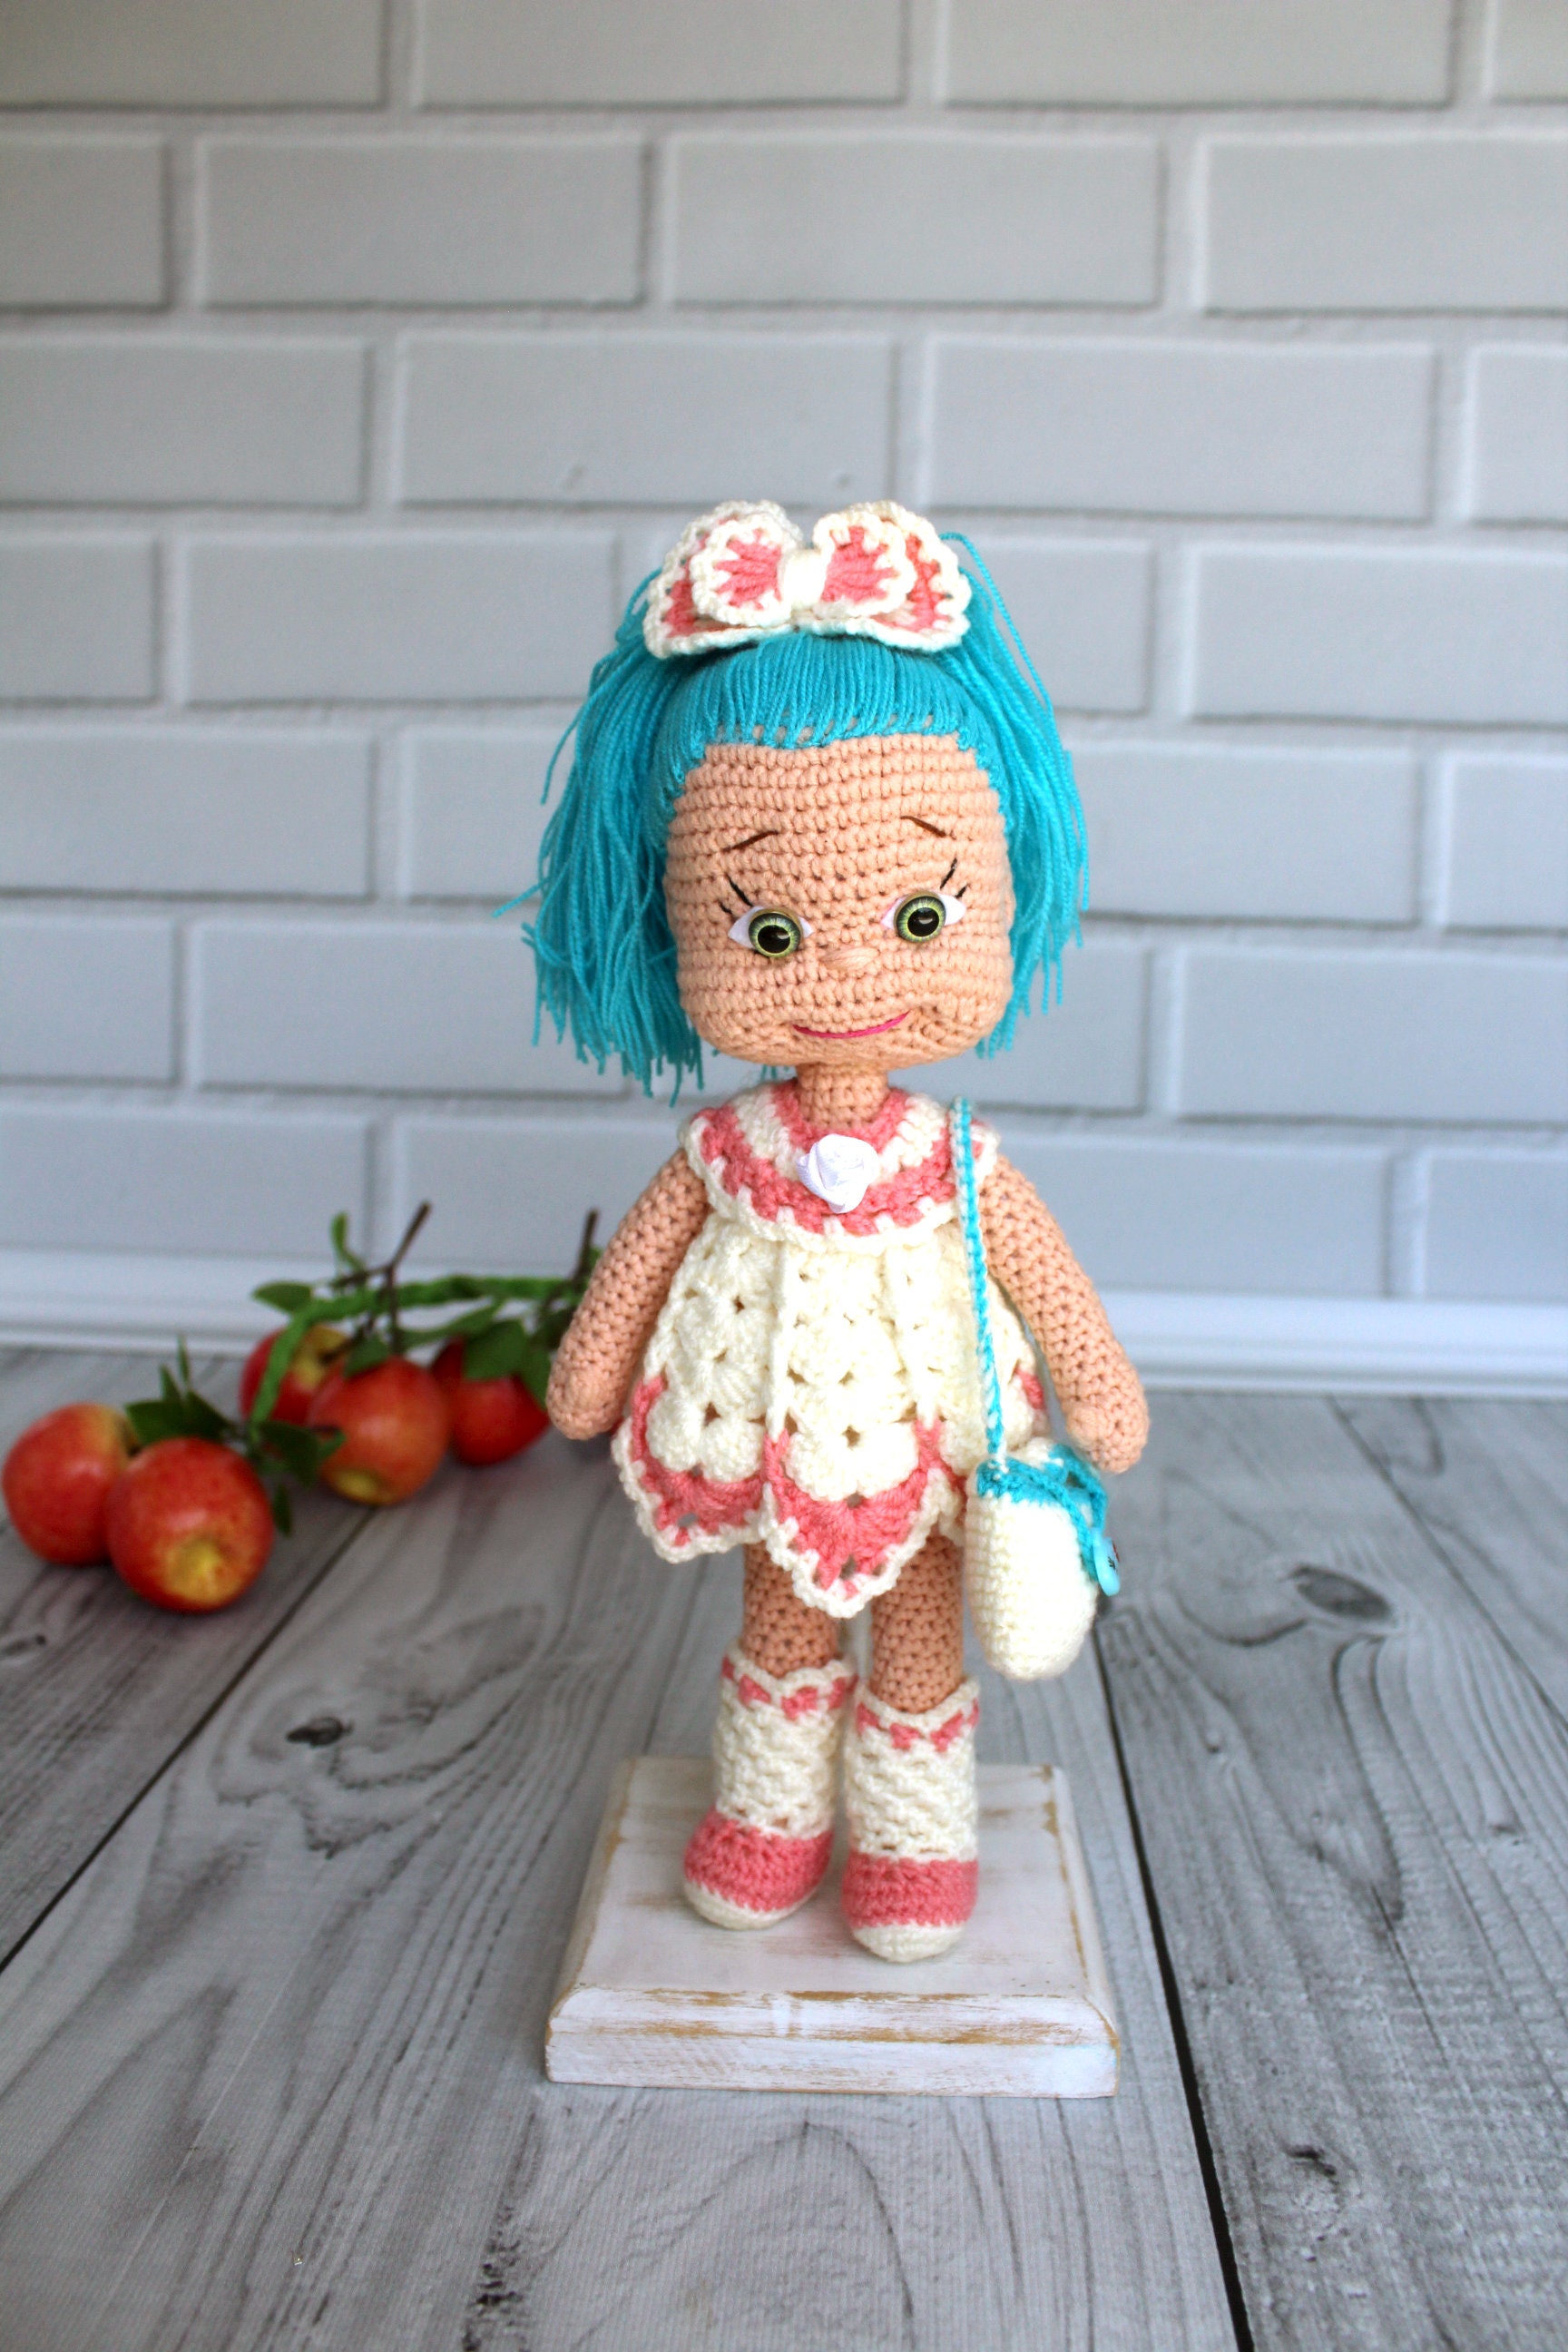 Eye Embroidery Pattern for Crochet Doll Embroidery Instruction for